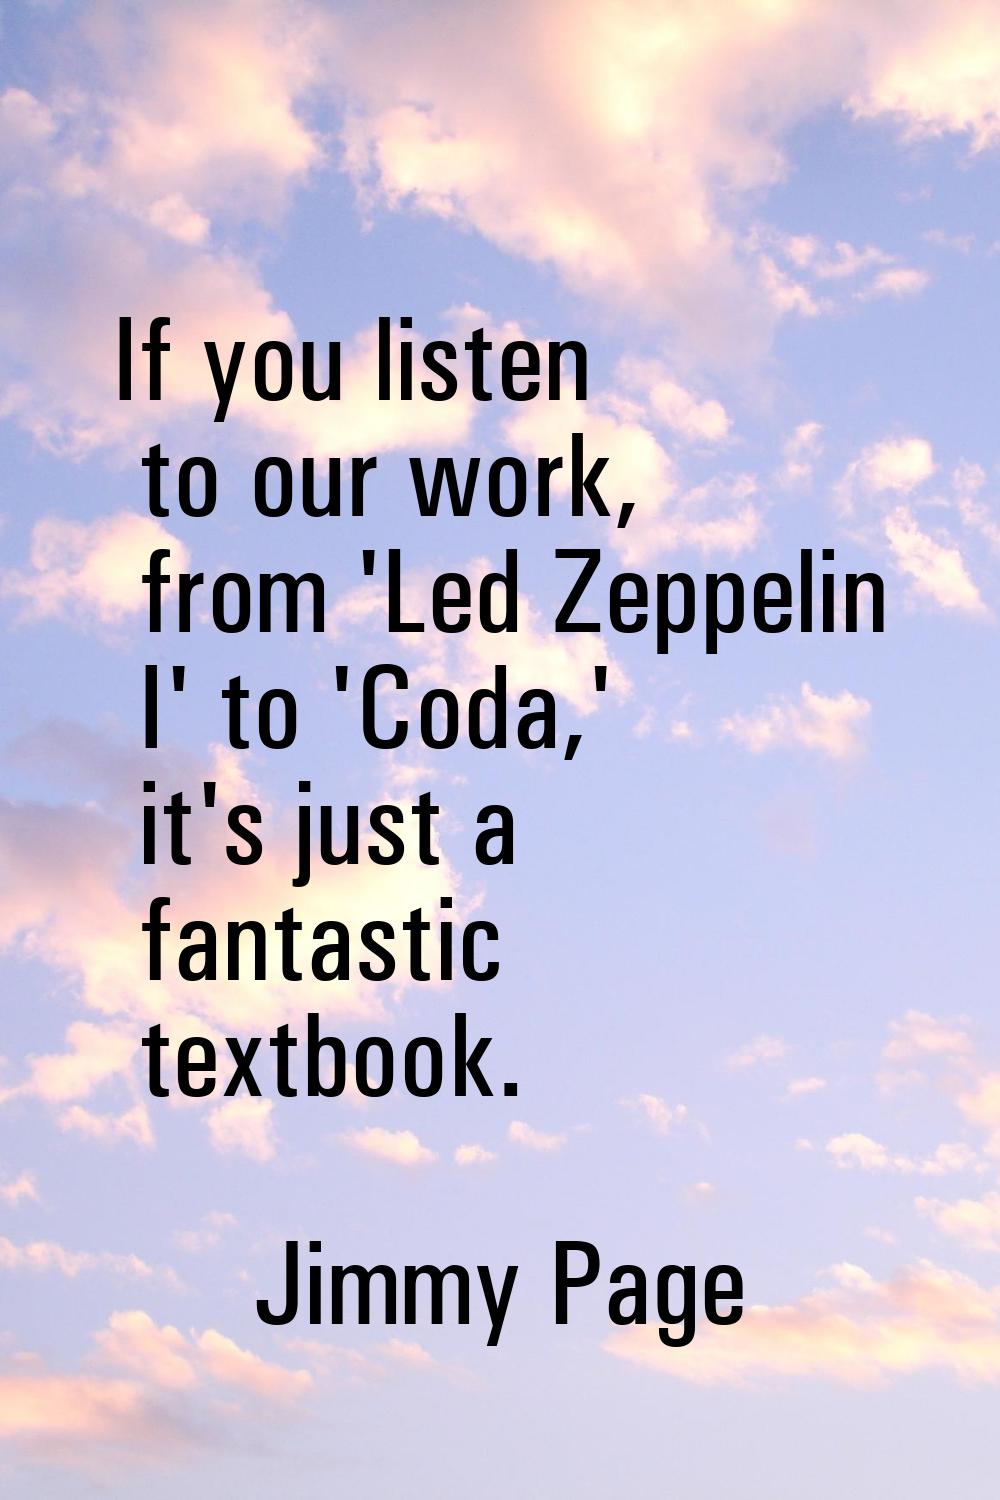 If you listen to our work, from 'Led Zeppelin I' to 'Coda,' it's just a fantastic textbook.